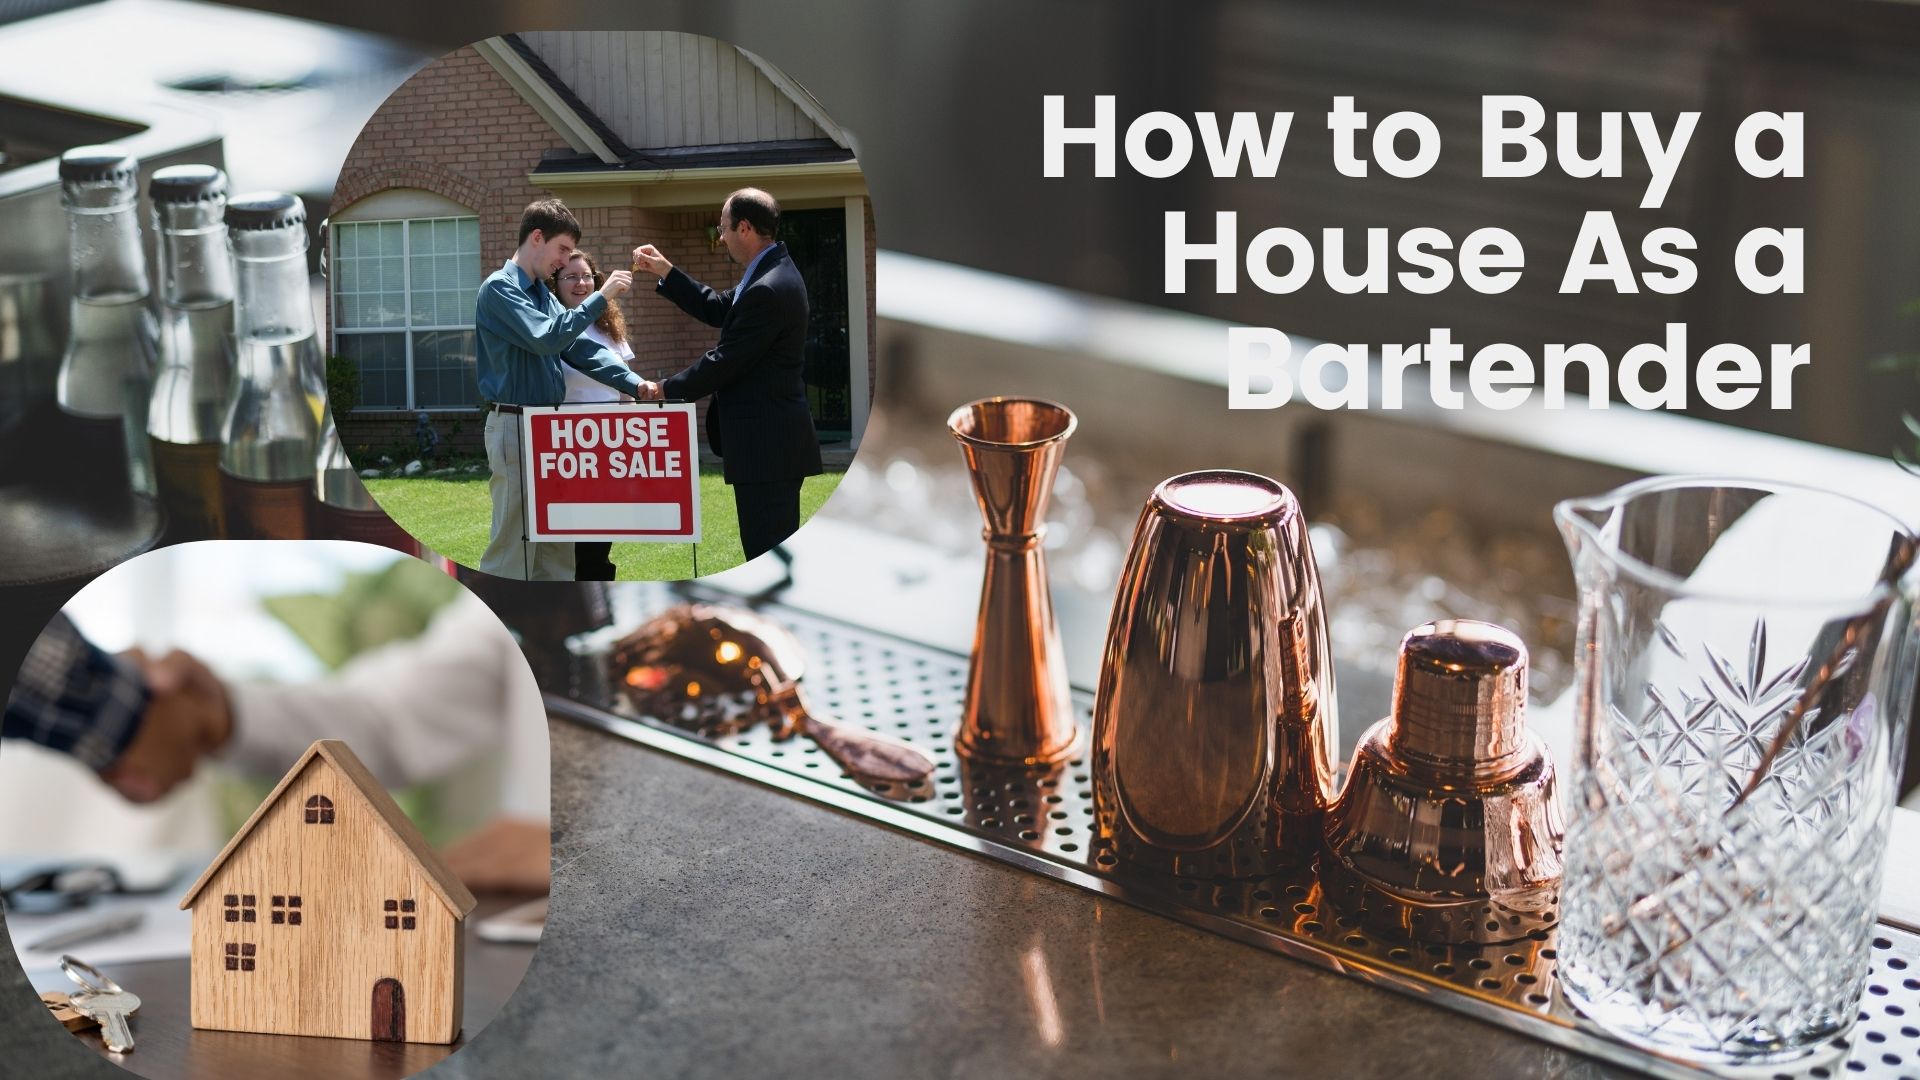 How to Buy a House As a Bartender